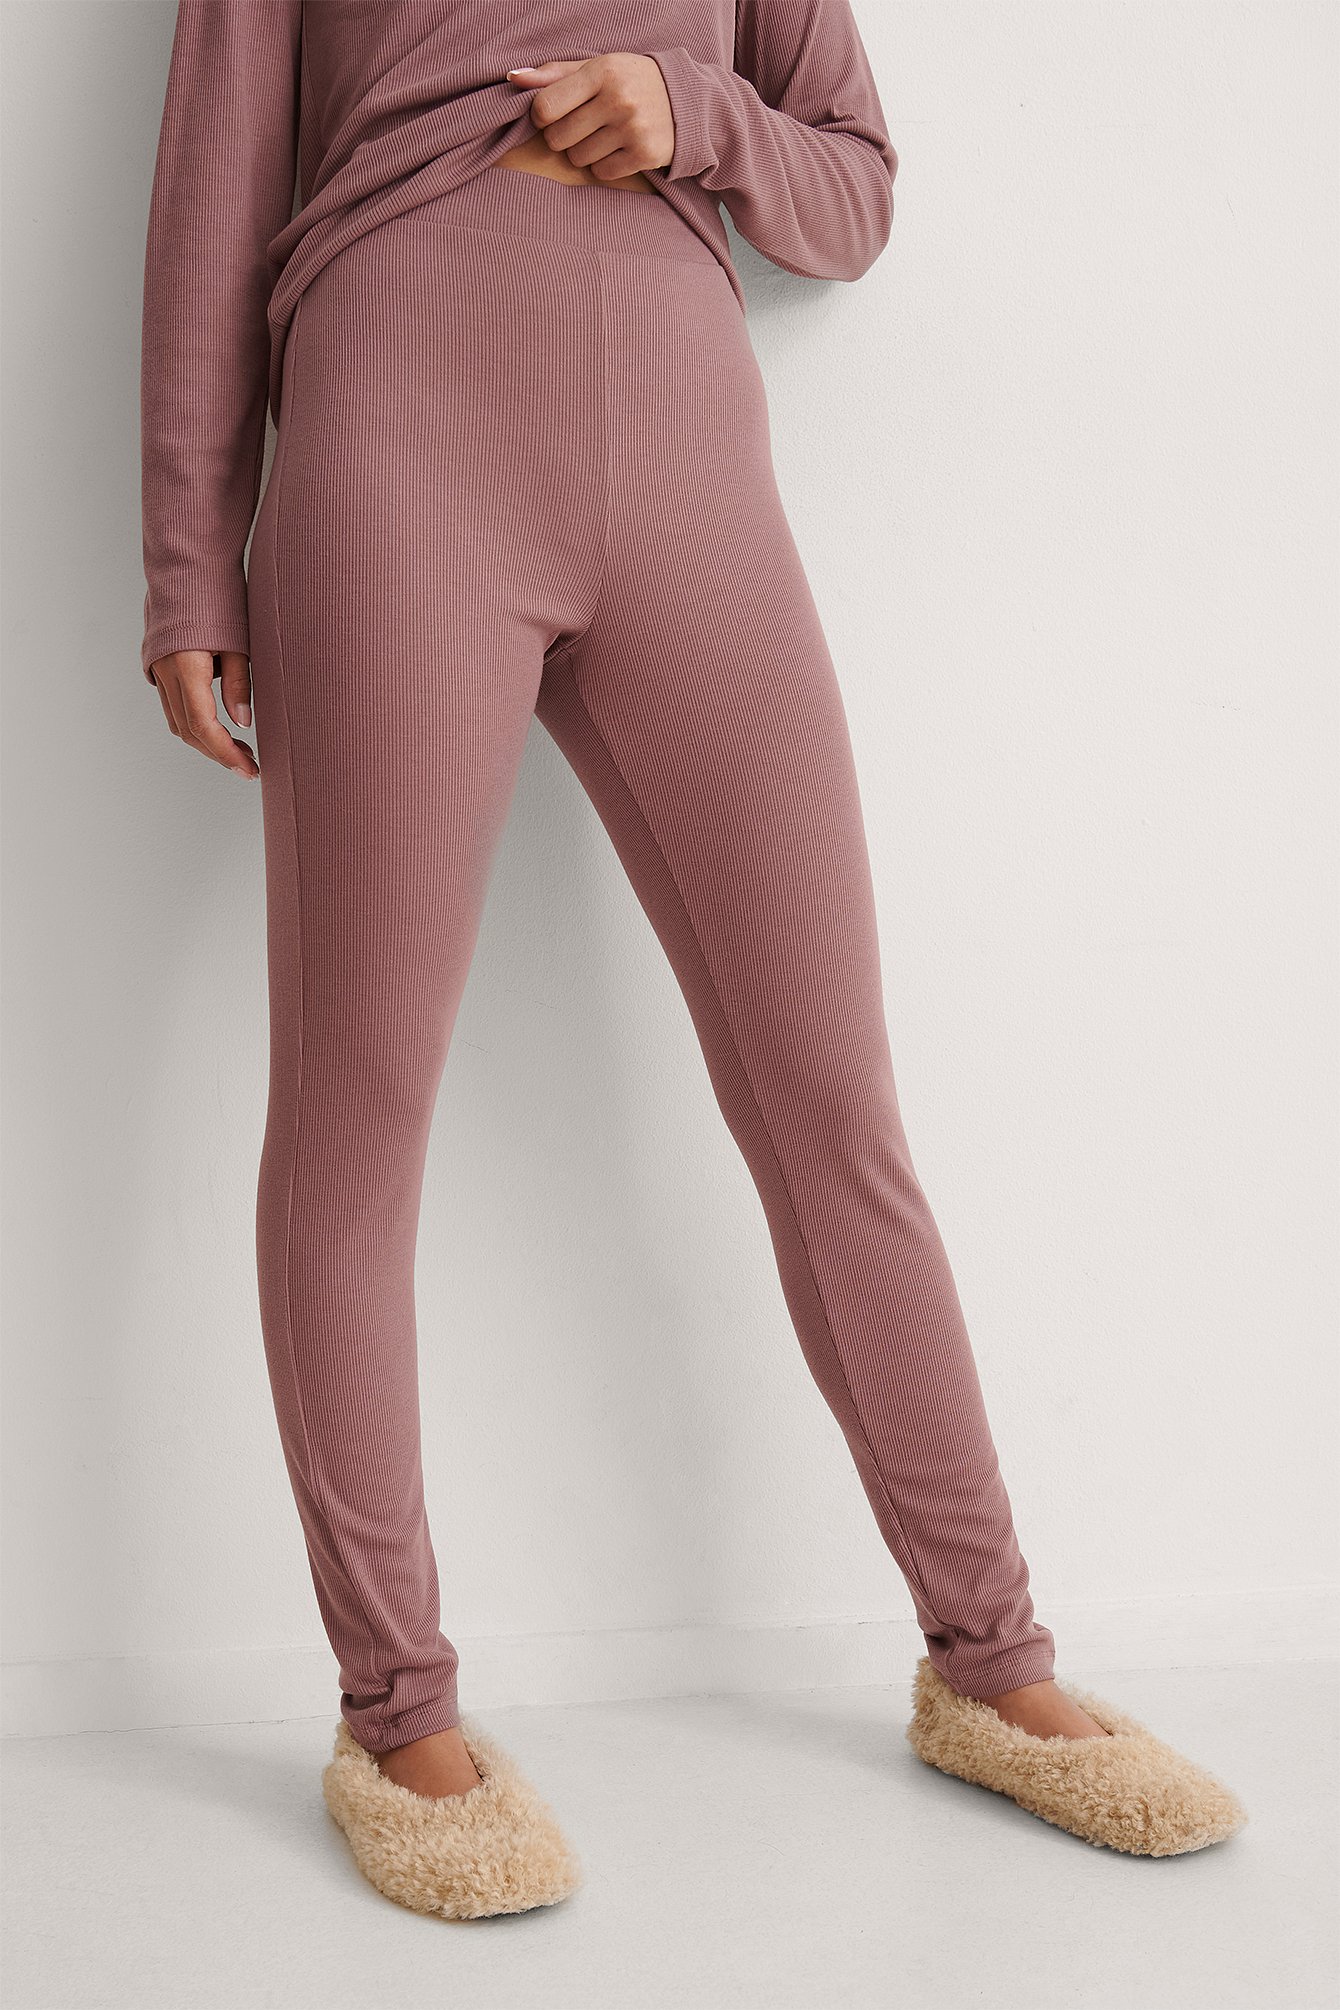 Rose Taupe Recycelte sanfte Ripp-Strumpfhose mit hoher Taille